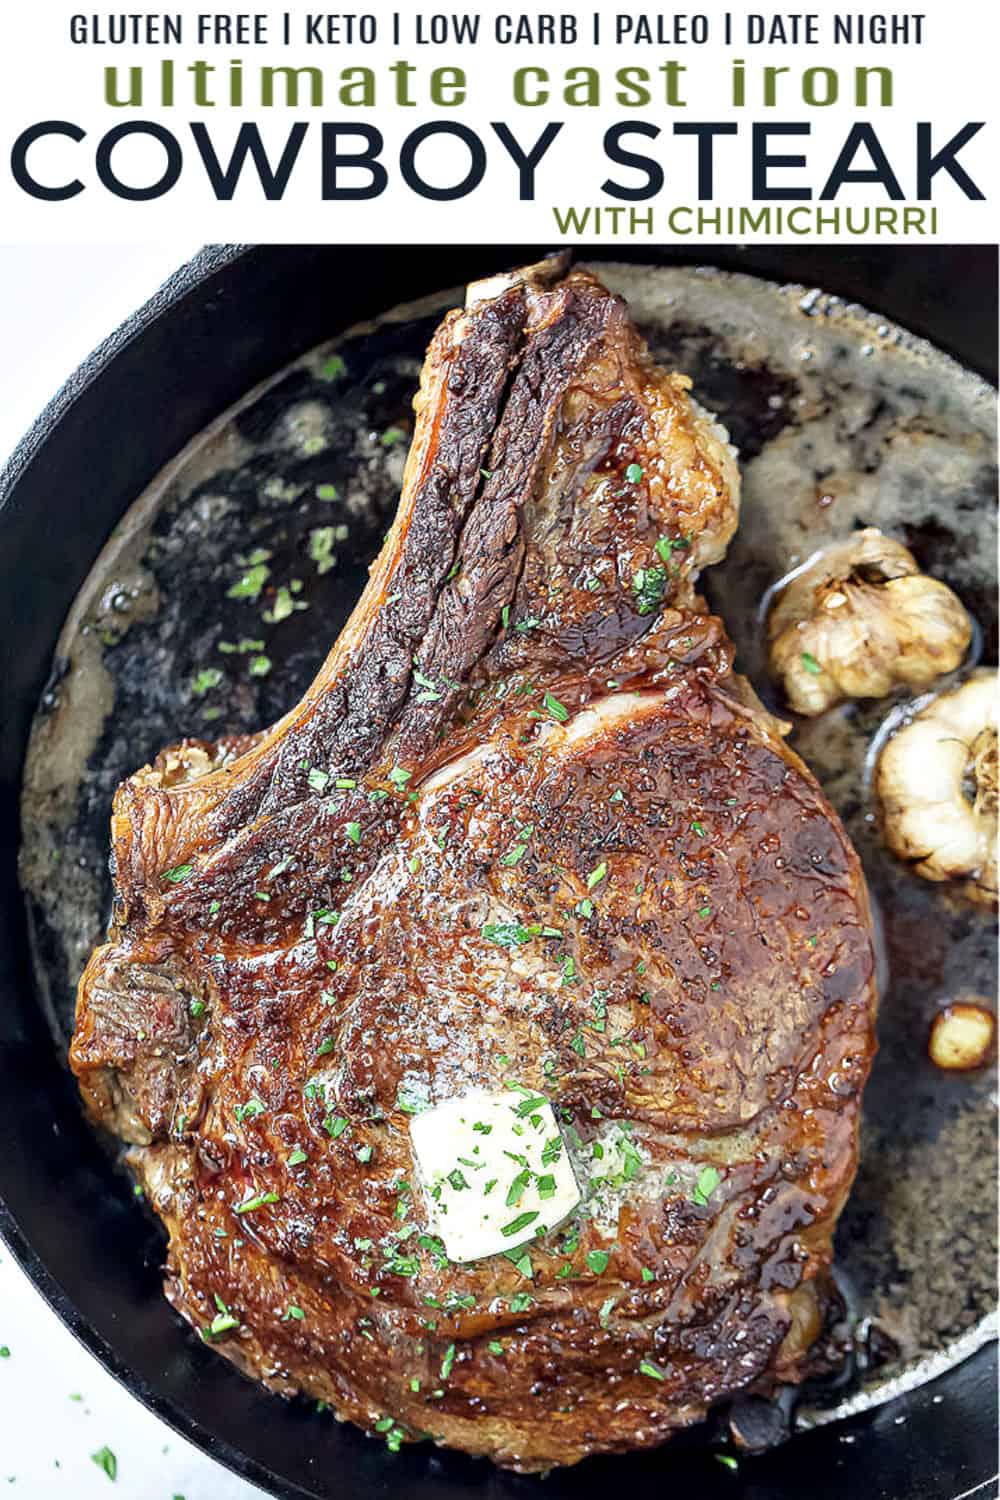 pinterest image for cast iron cowboy steak with chimichurri